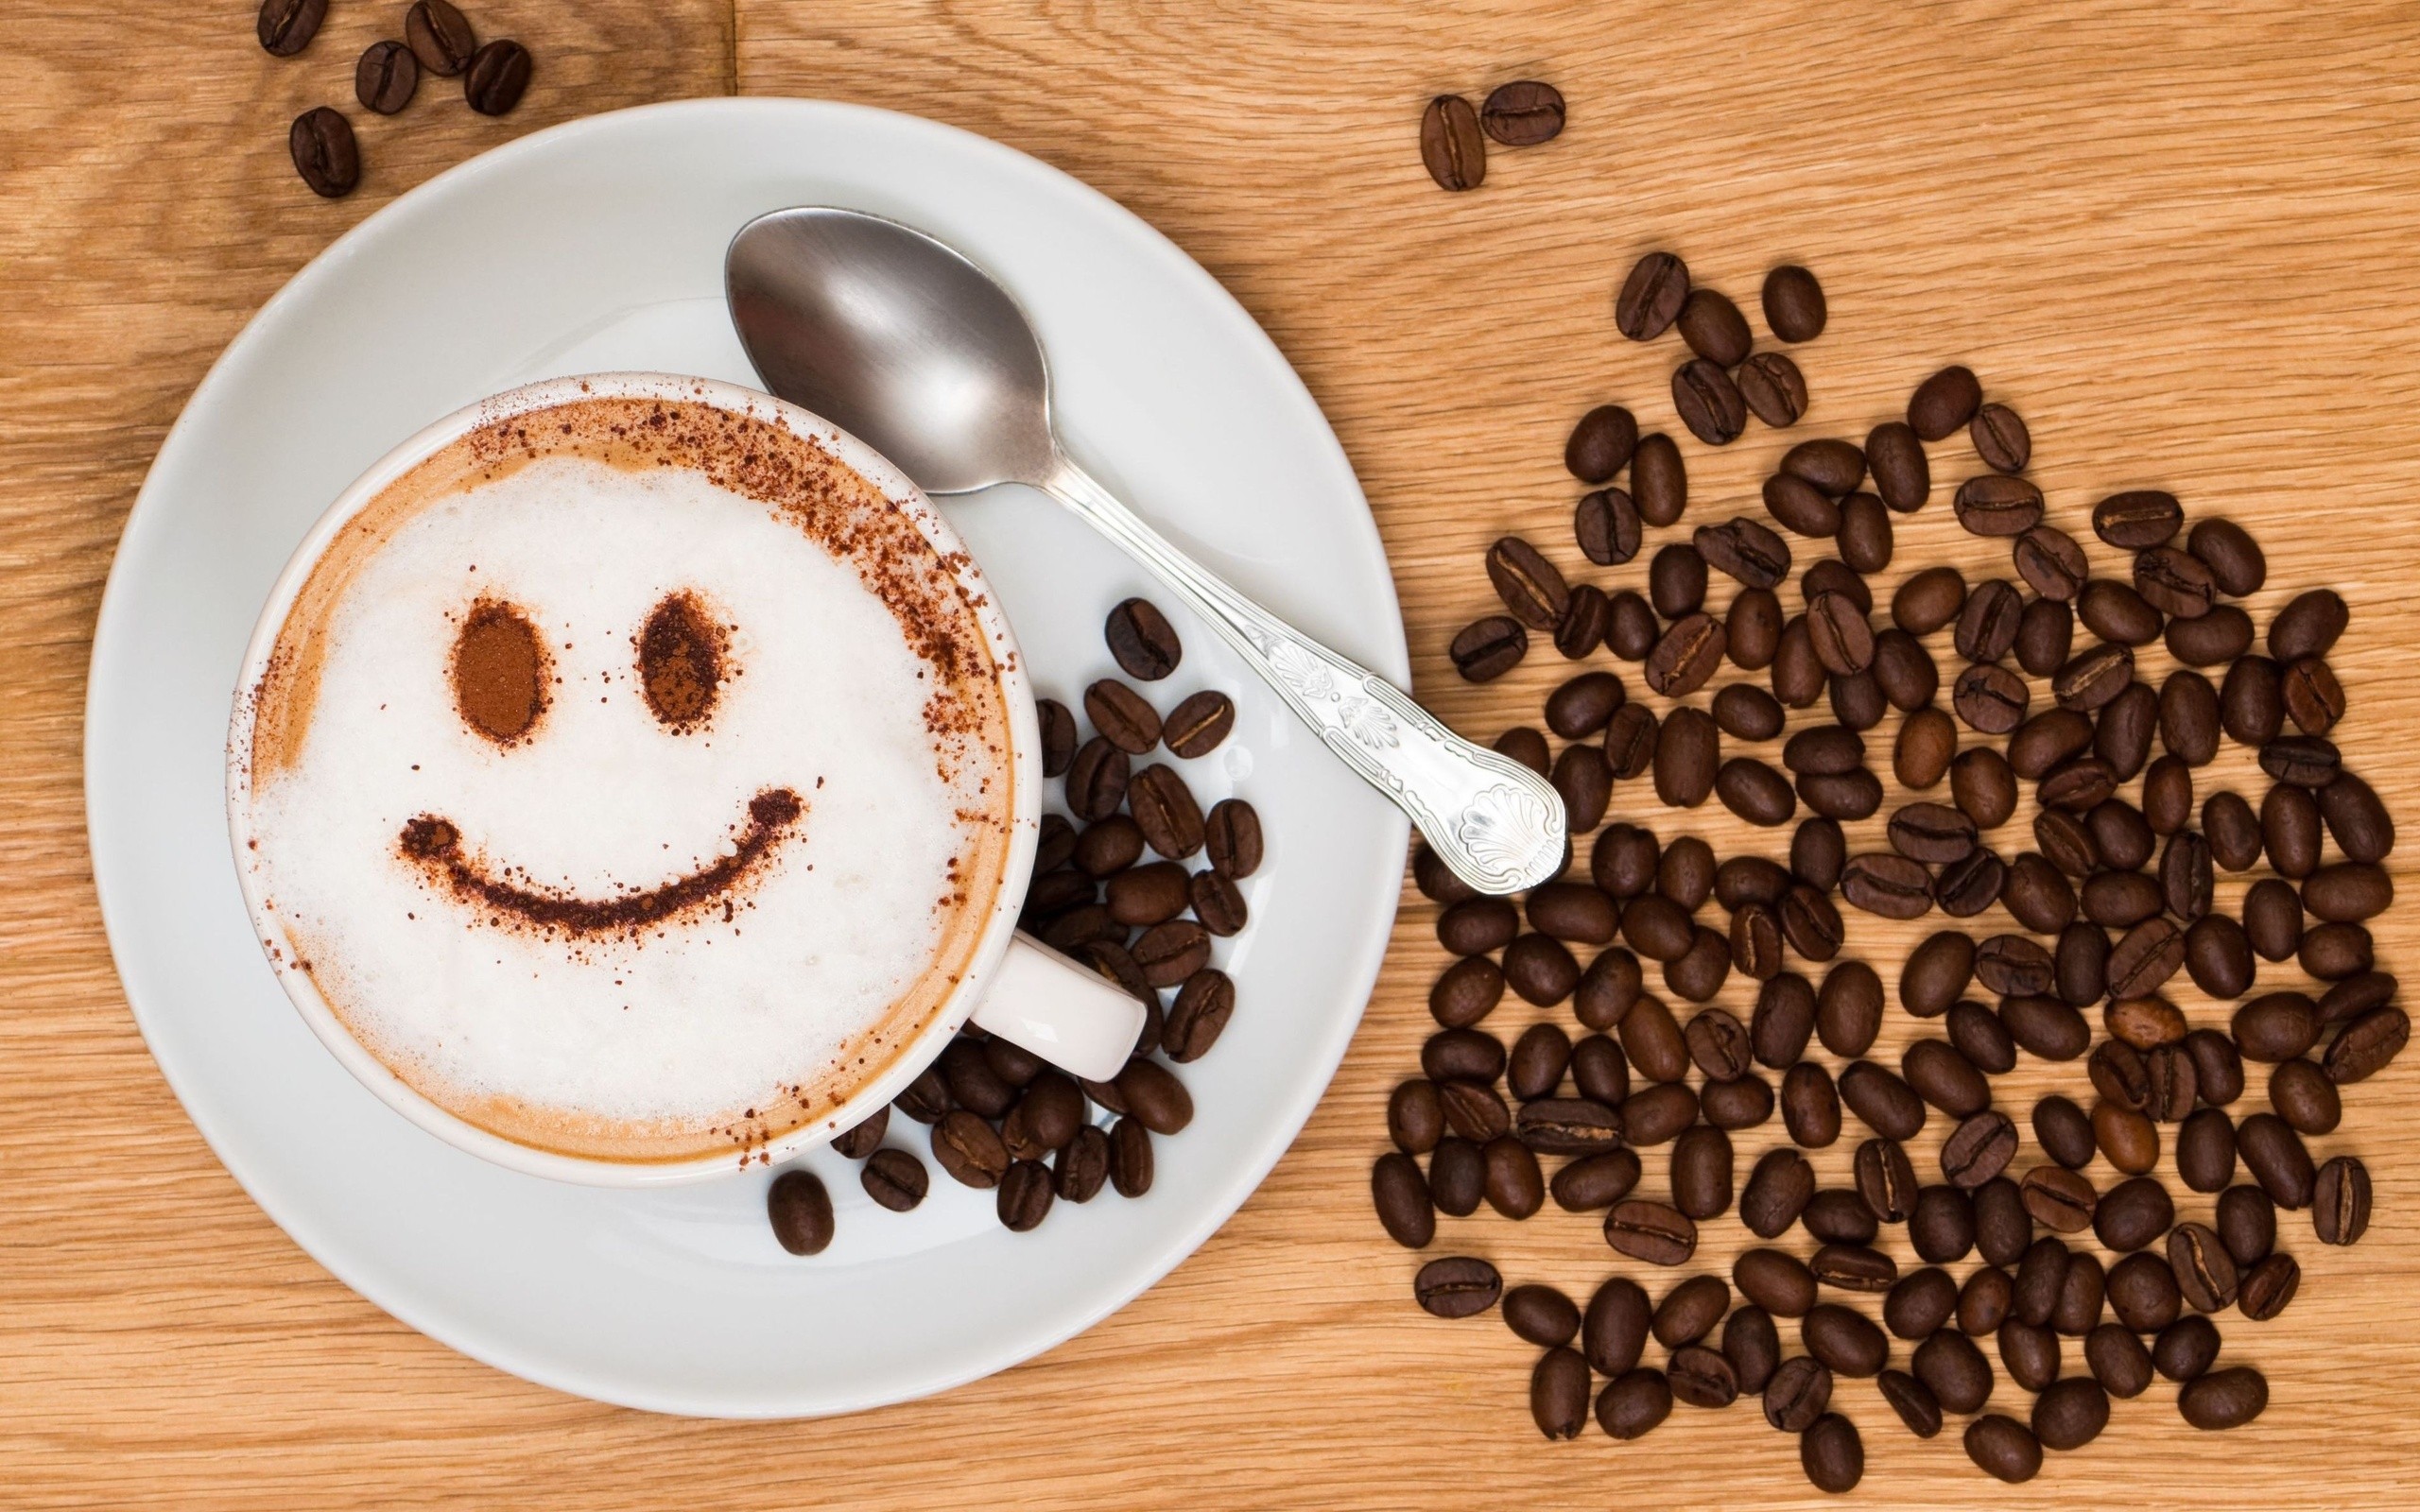 General 2560x1600 coffee coffee beans smiley spoon cup food